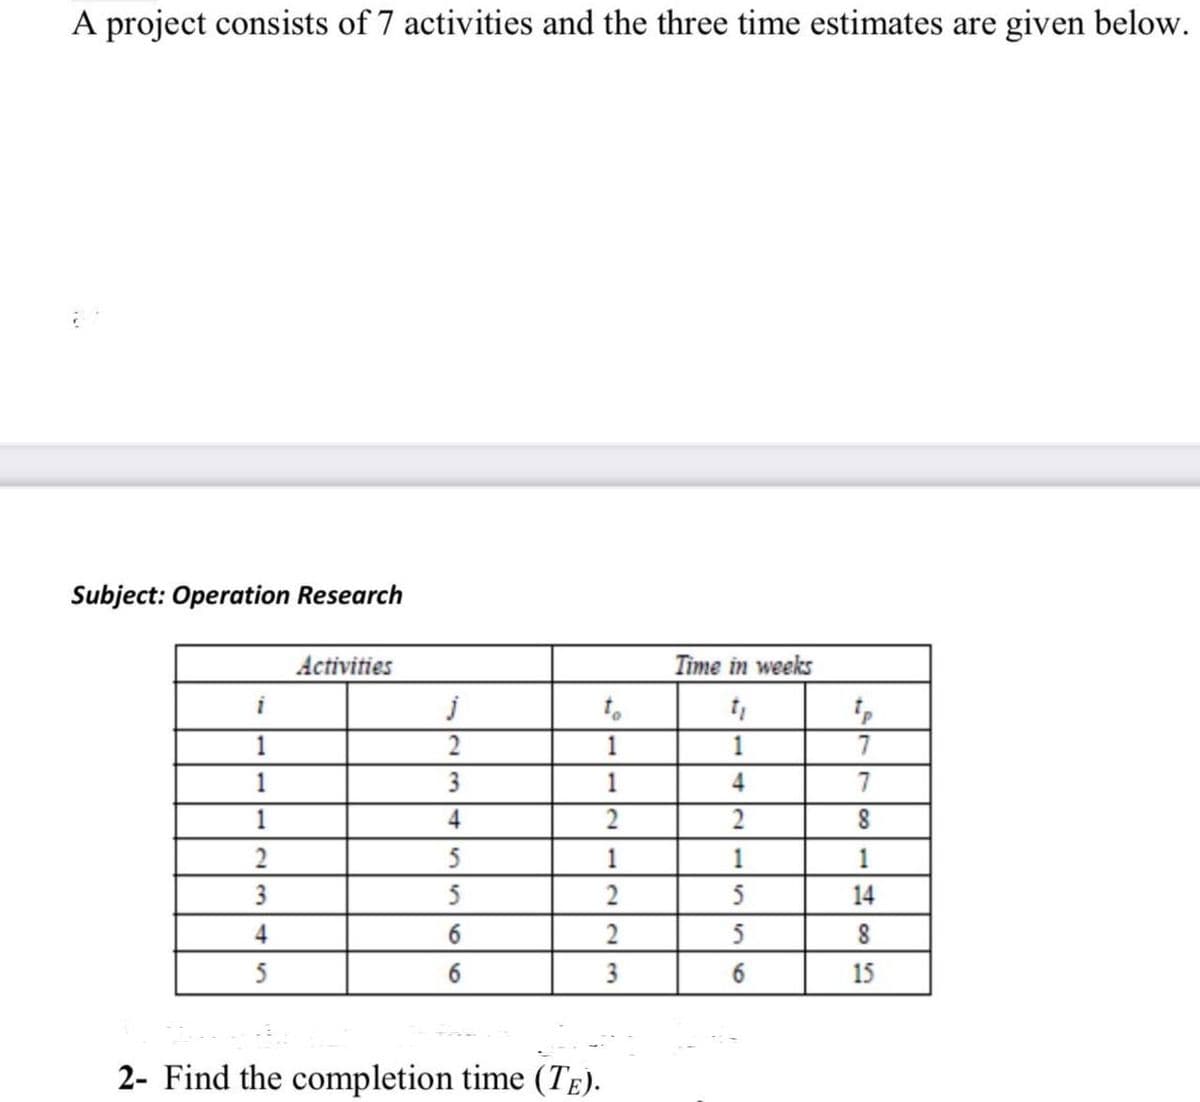 A project consists of 7 activities and the three time estimates are given below.
Subject: Operation Research
Activities
Time in weeks
1
2
1
1
7
1
3
1
4
7
1
4
2
2
5
1
1
1
3
5
5
14
4
6.
5
5
3
15
2- Find the completion time (TE).
